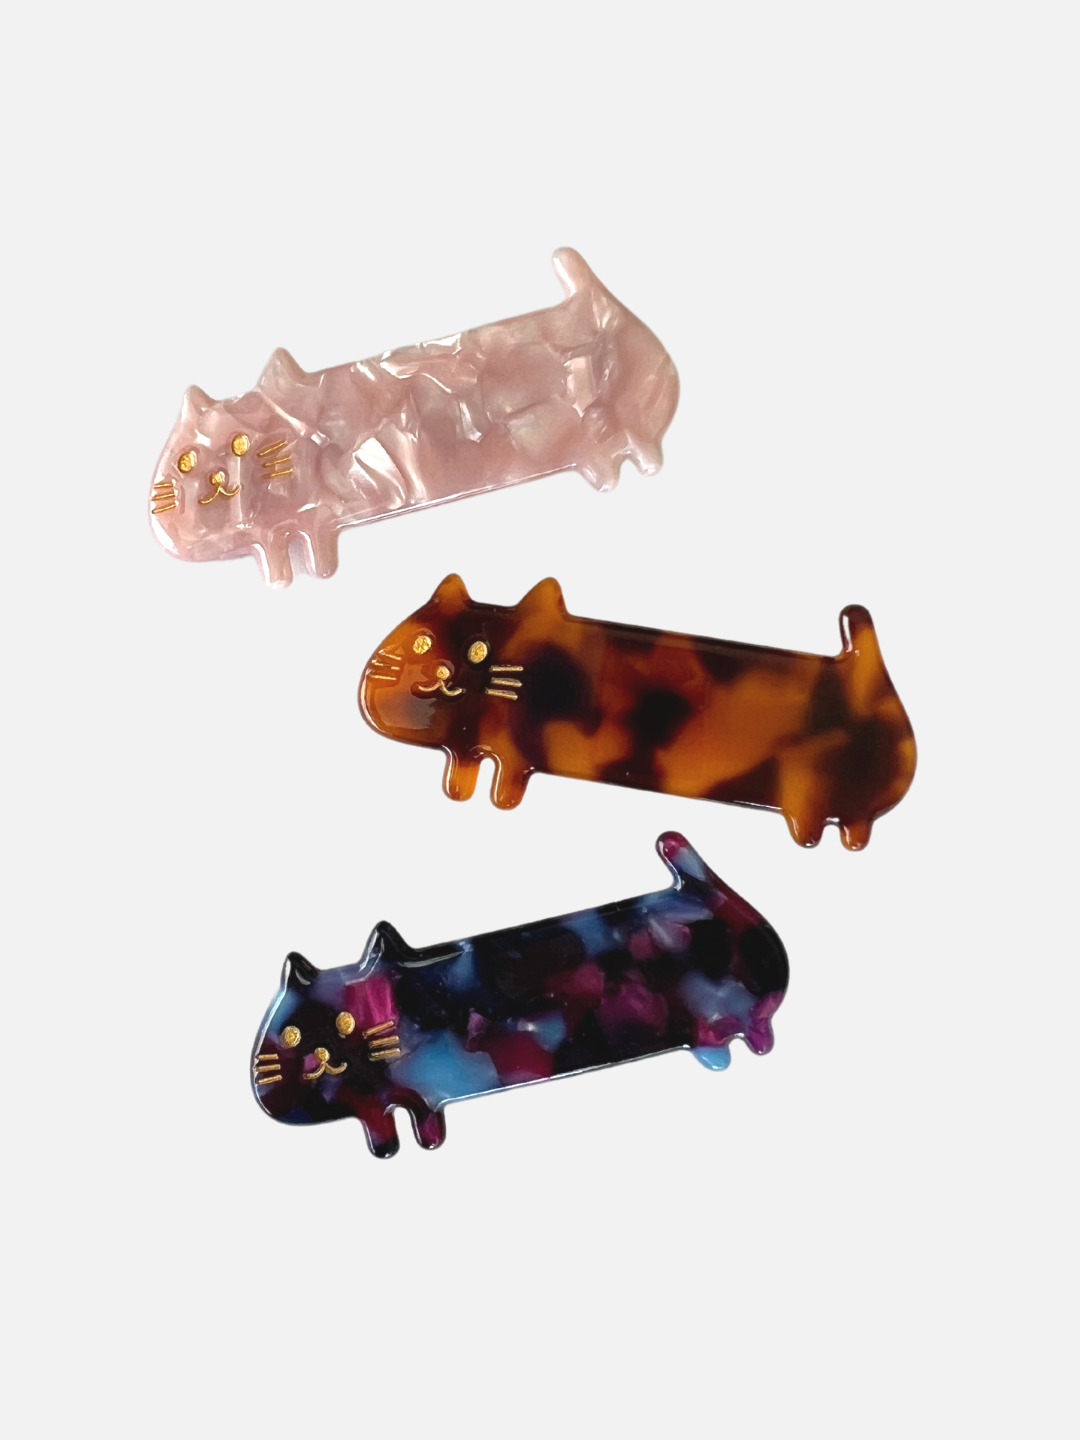 Three kids' barrettes in the shape of elongated cats: one pink, one ginger, one purple